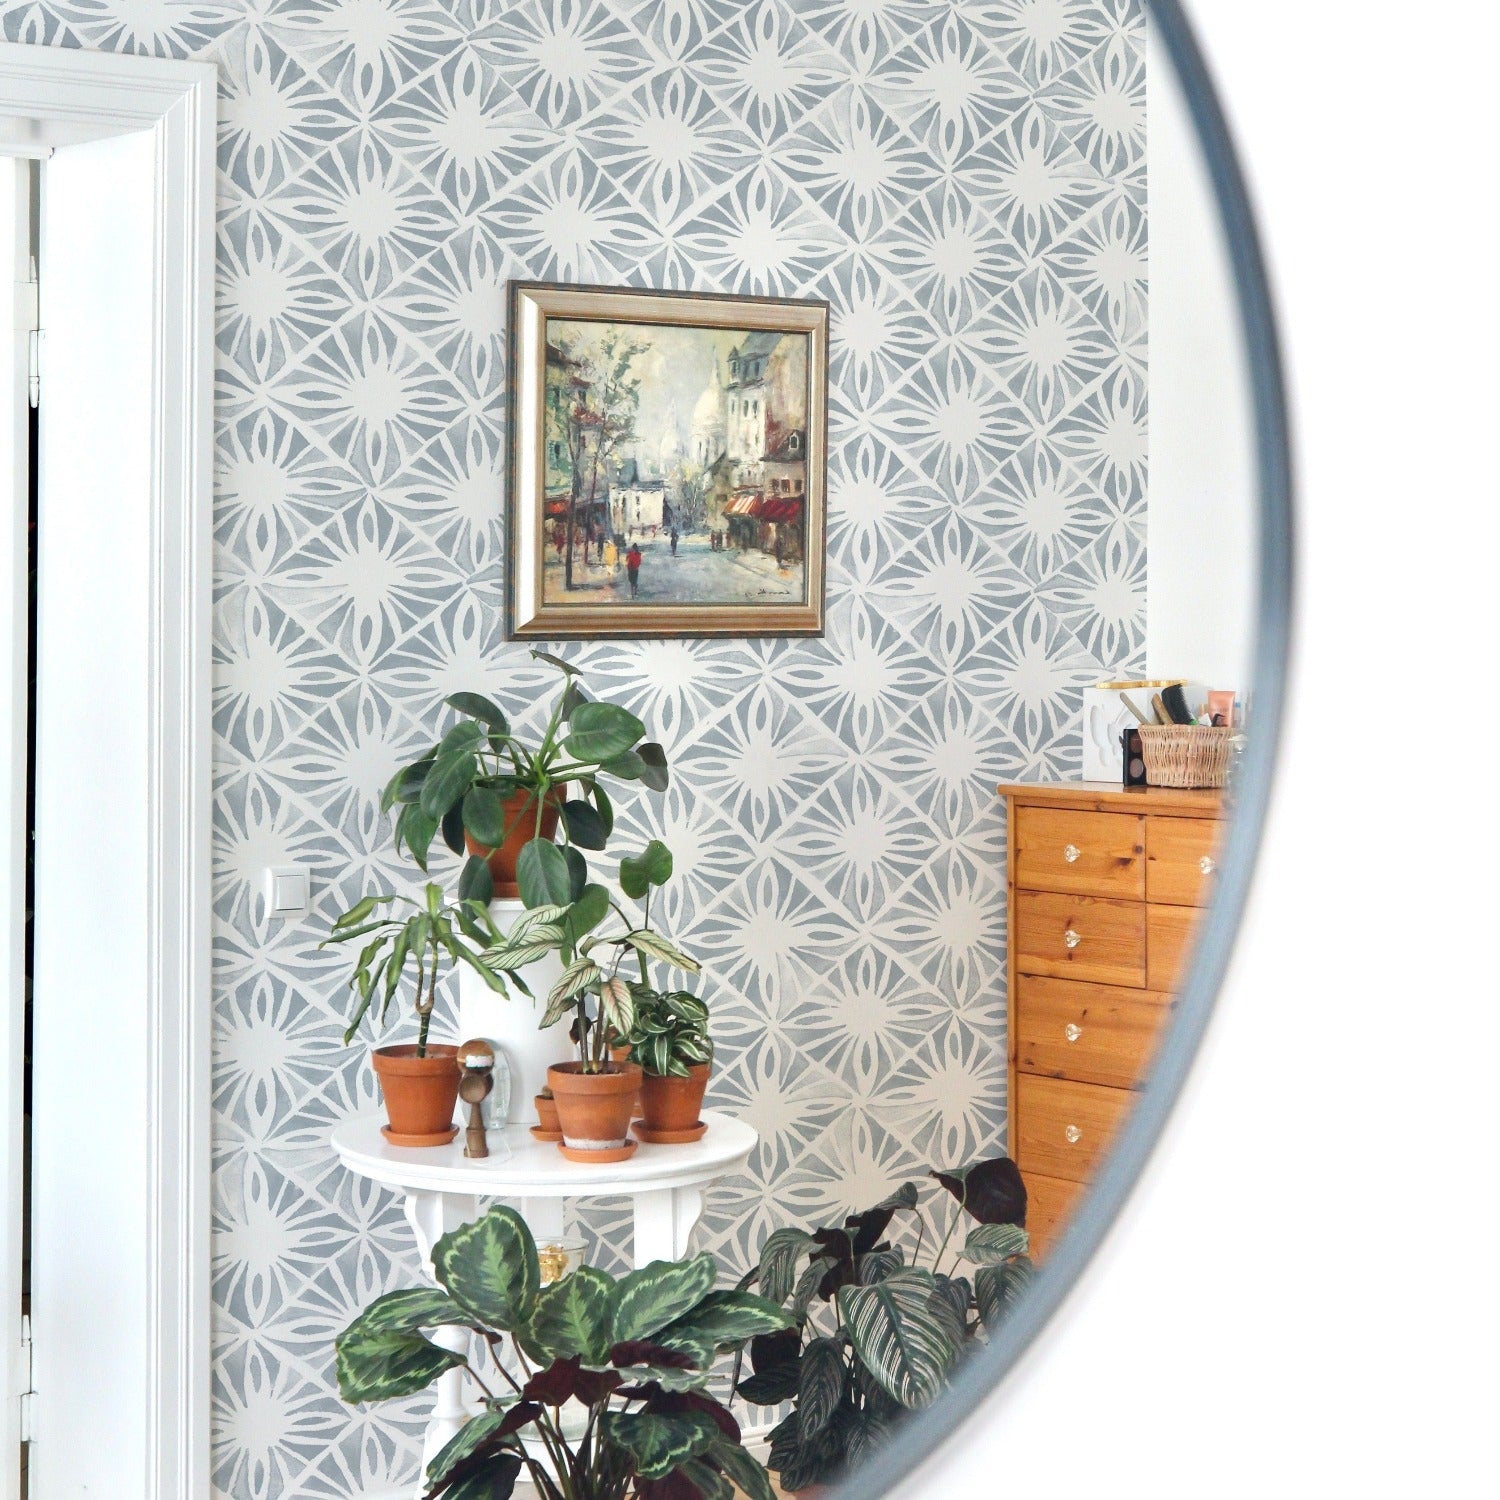 A room corner with a white side table hosting potted plants is reflected in a circular mirror, set against the Moroccan Tile II Wallpaper, which showcases an intricate white and pale blue geometric pattern for an elegant and airy feel.